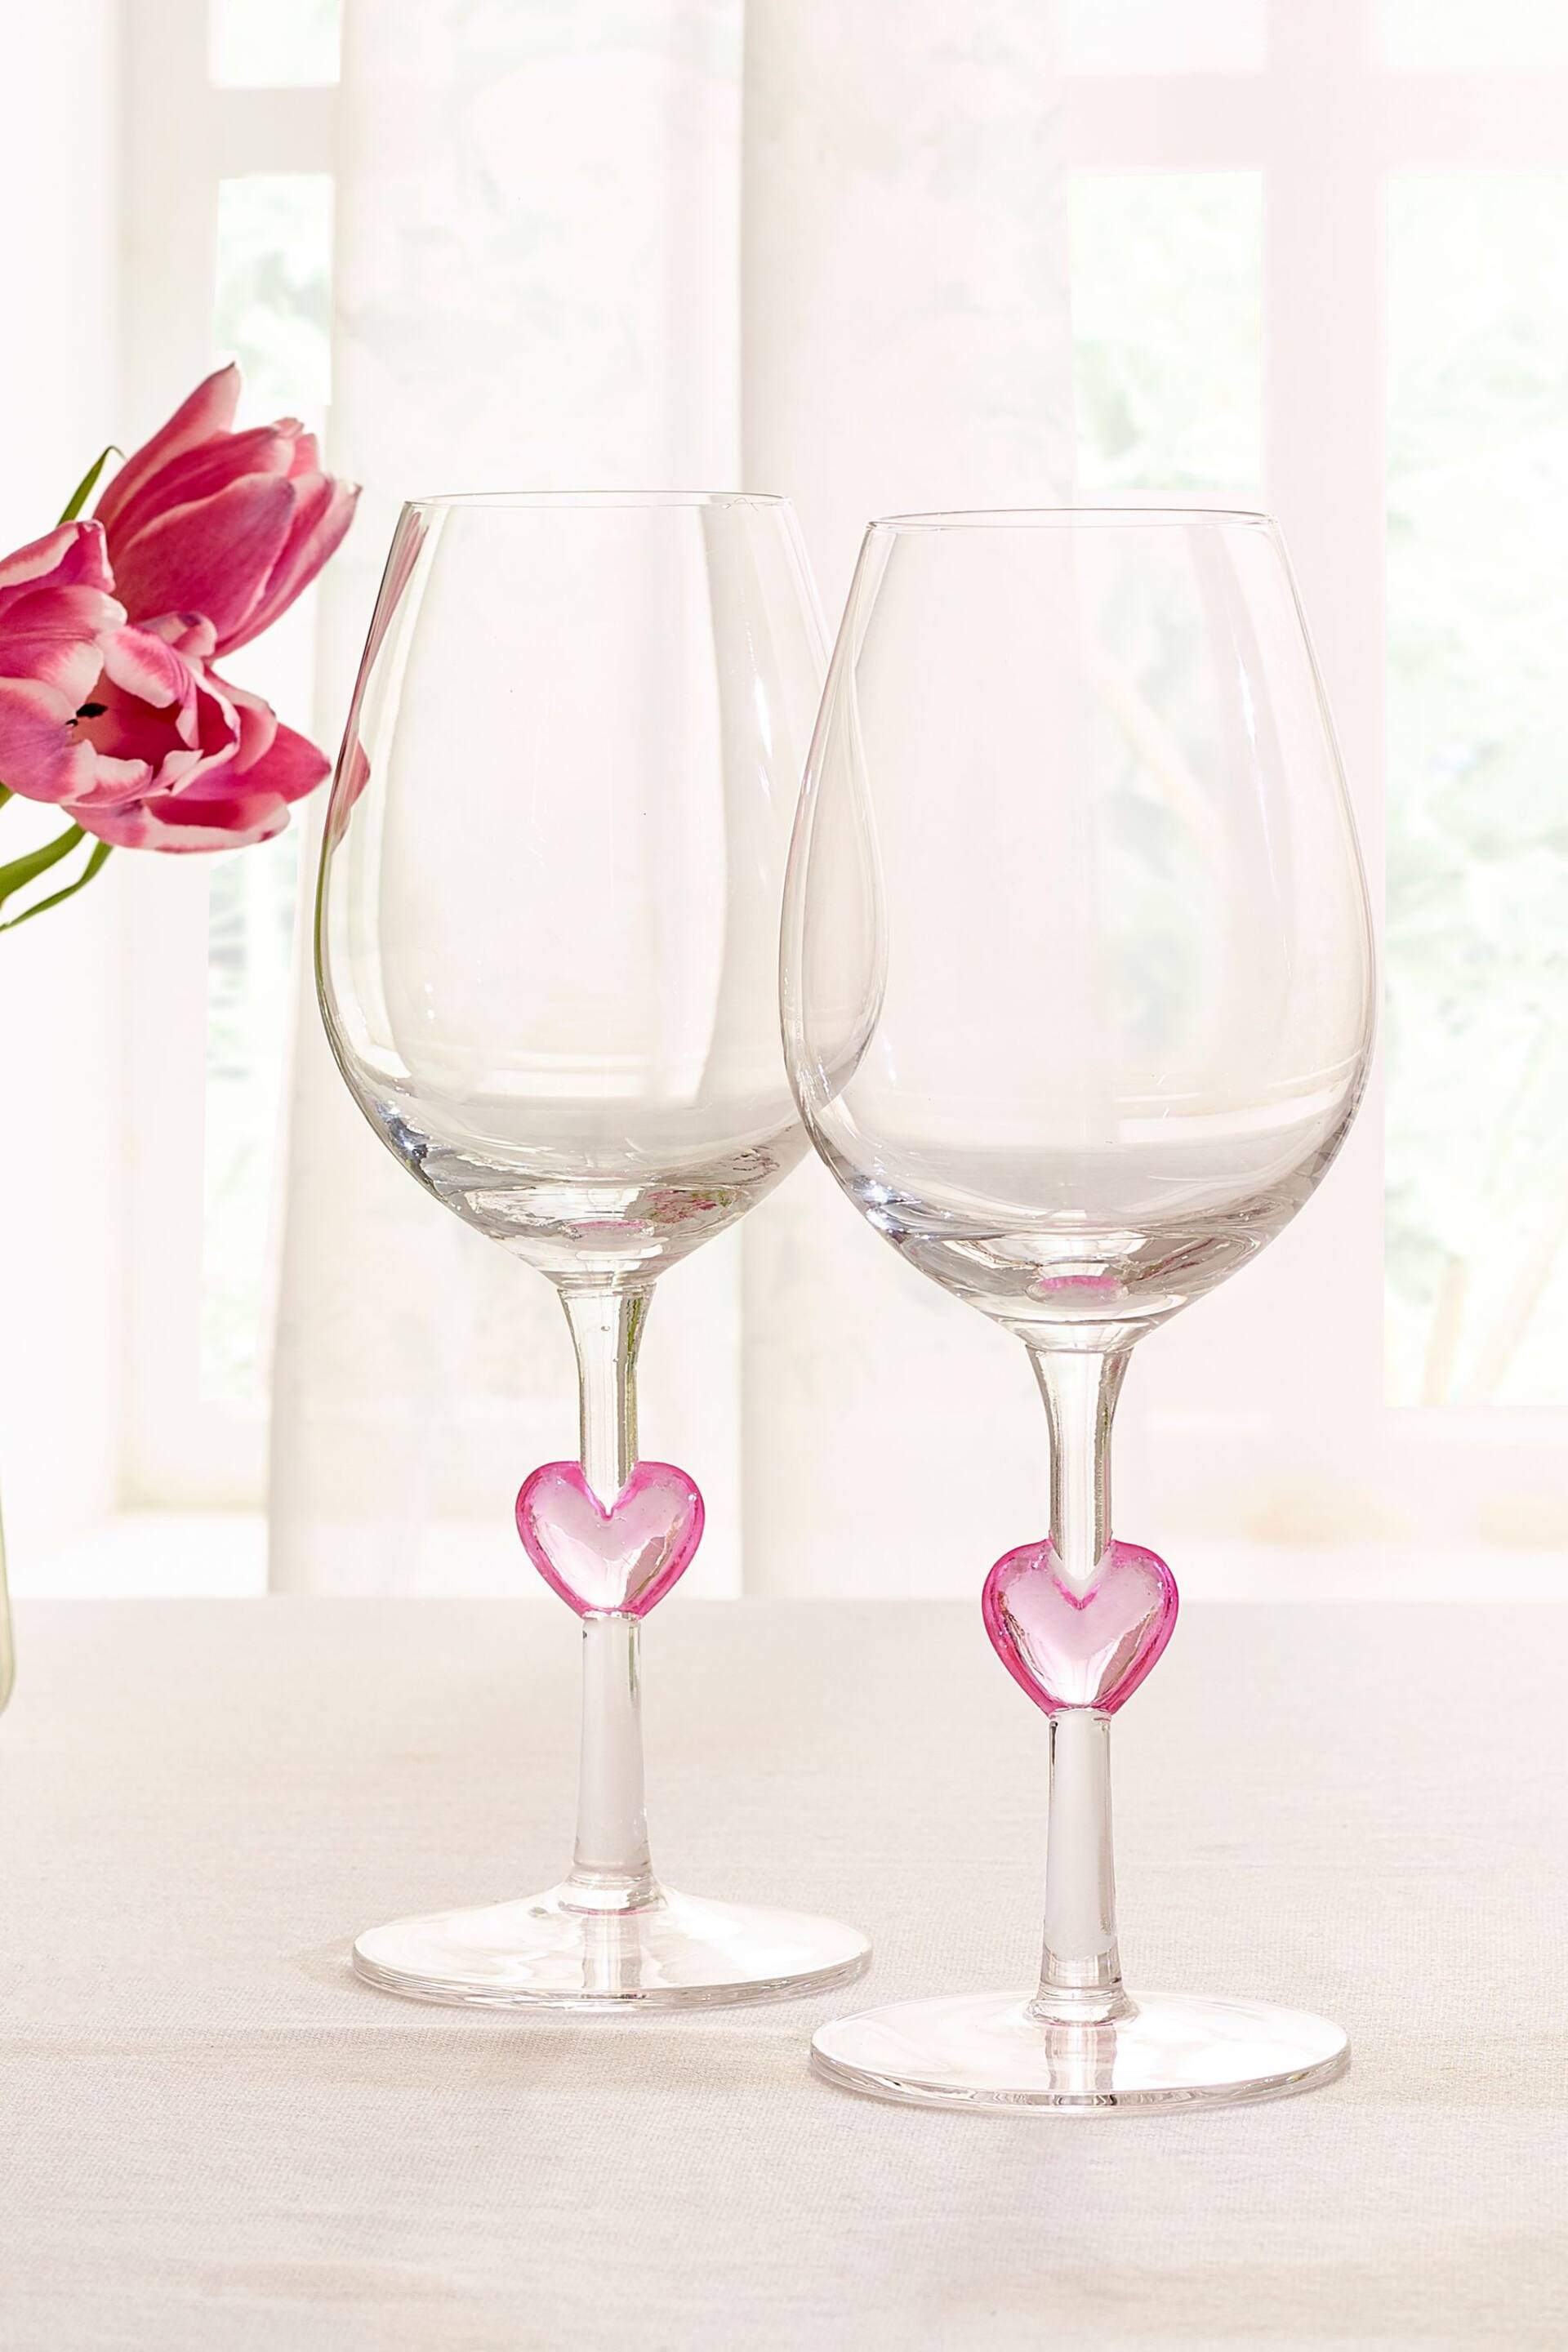 Set of 2 Clear Heart Stem Wine Glasses - Image 2 of 4